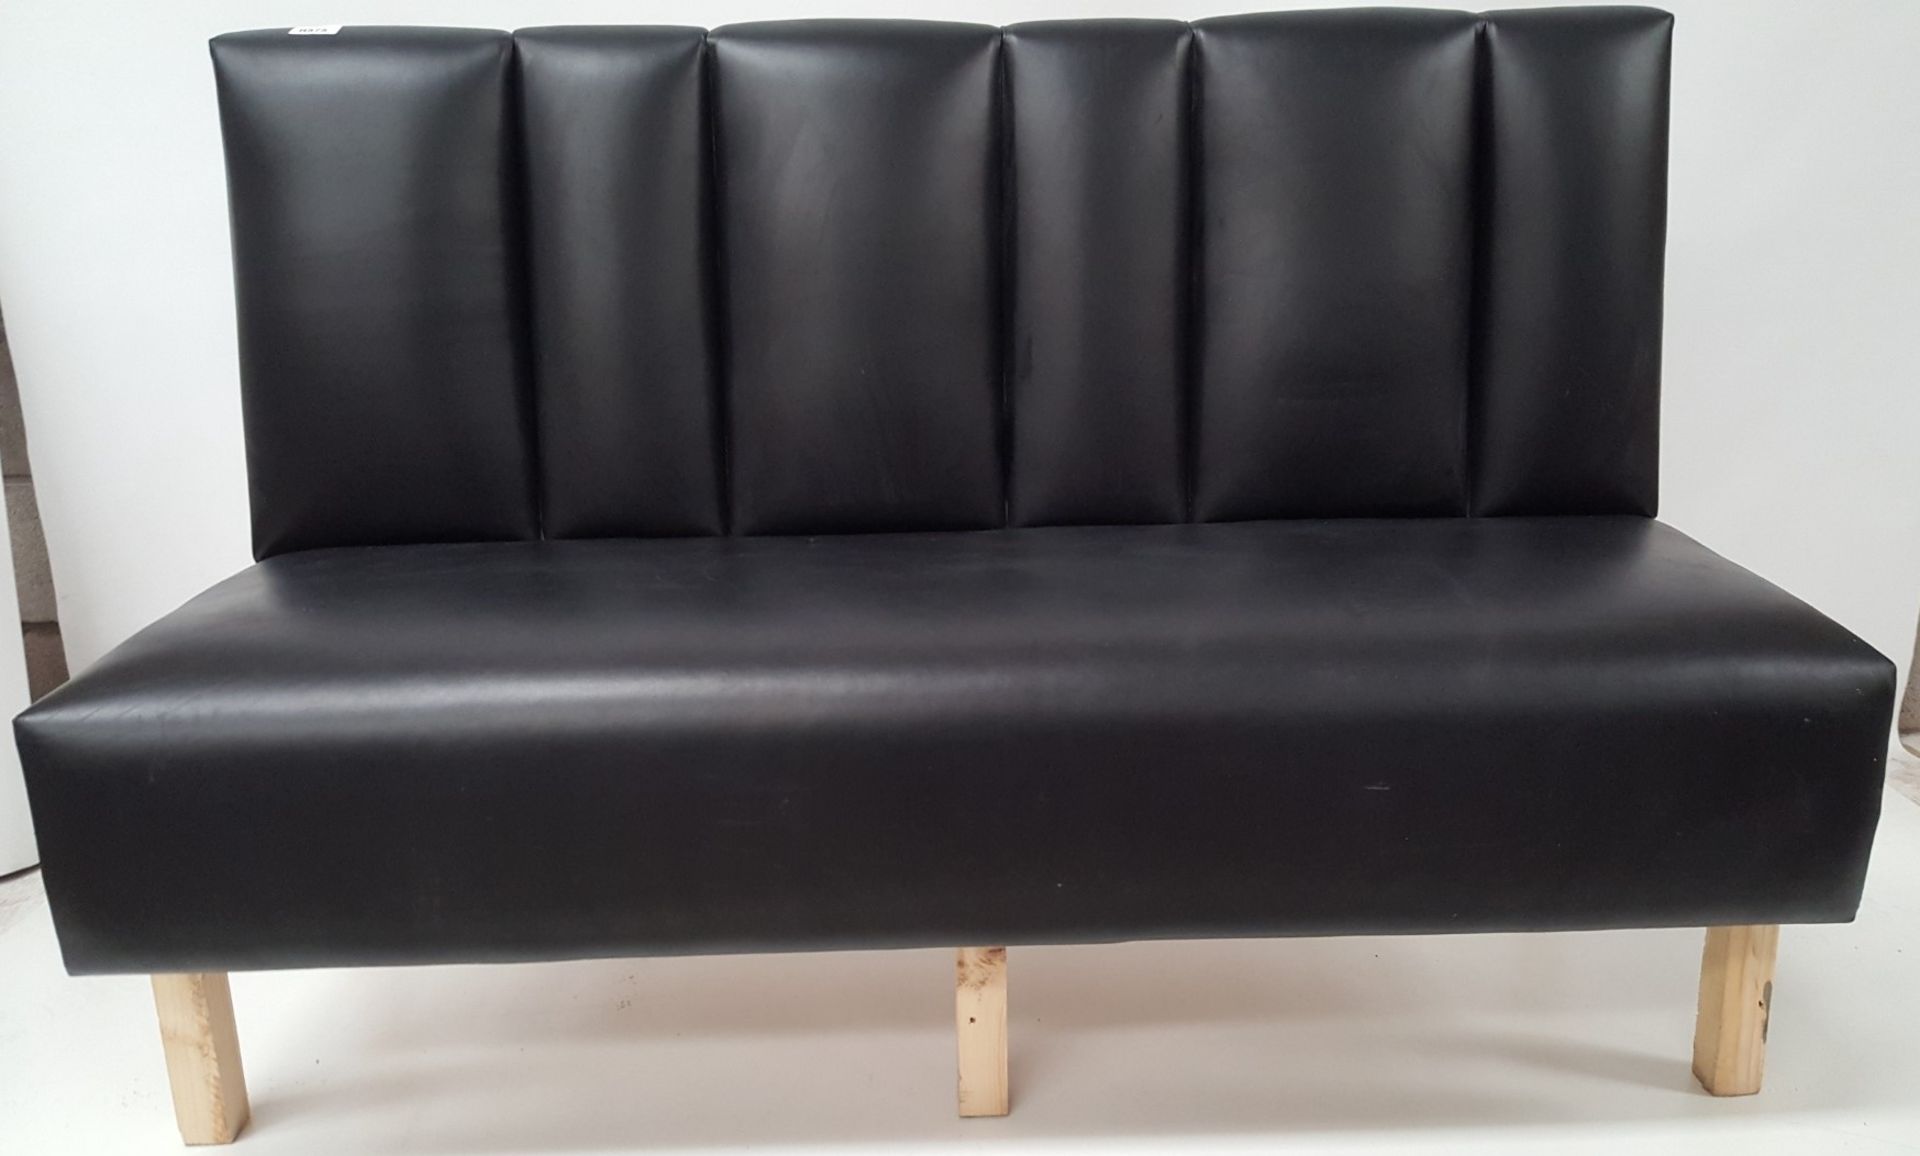 3 Pieces Of Black Upholstered Faux Leather Seating Booths - CL431 - Location: Altrincham WA14 - Image 12 of 19